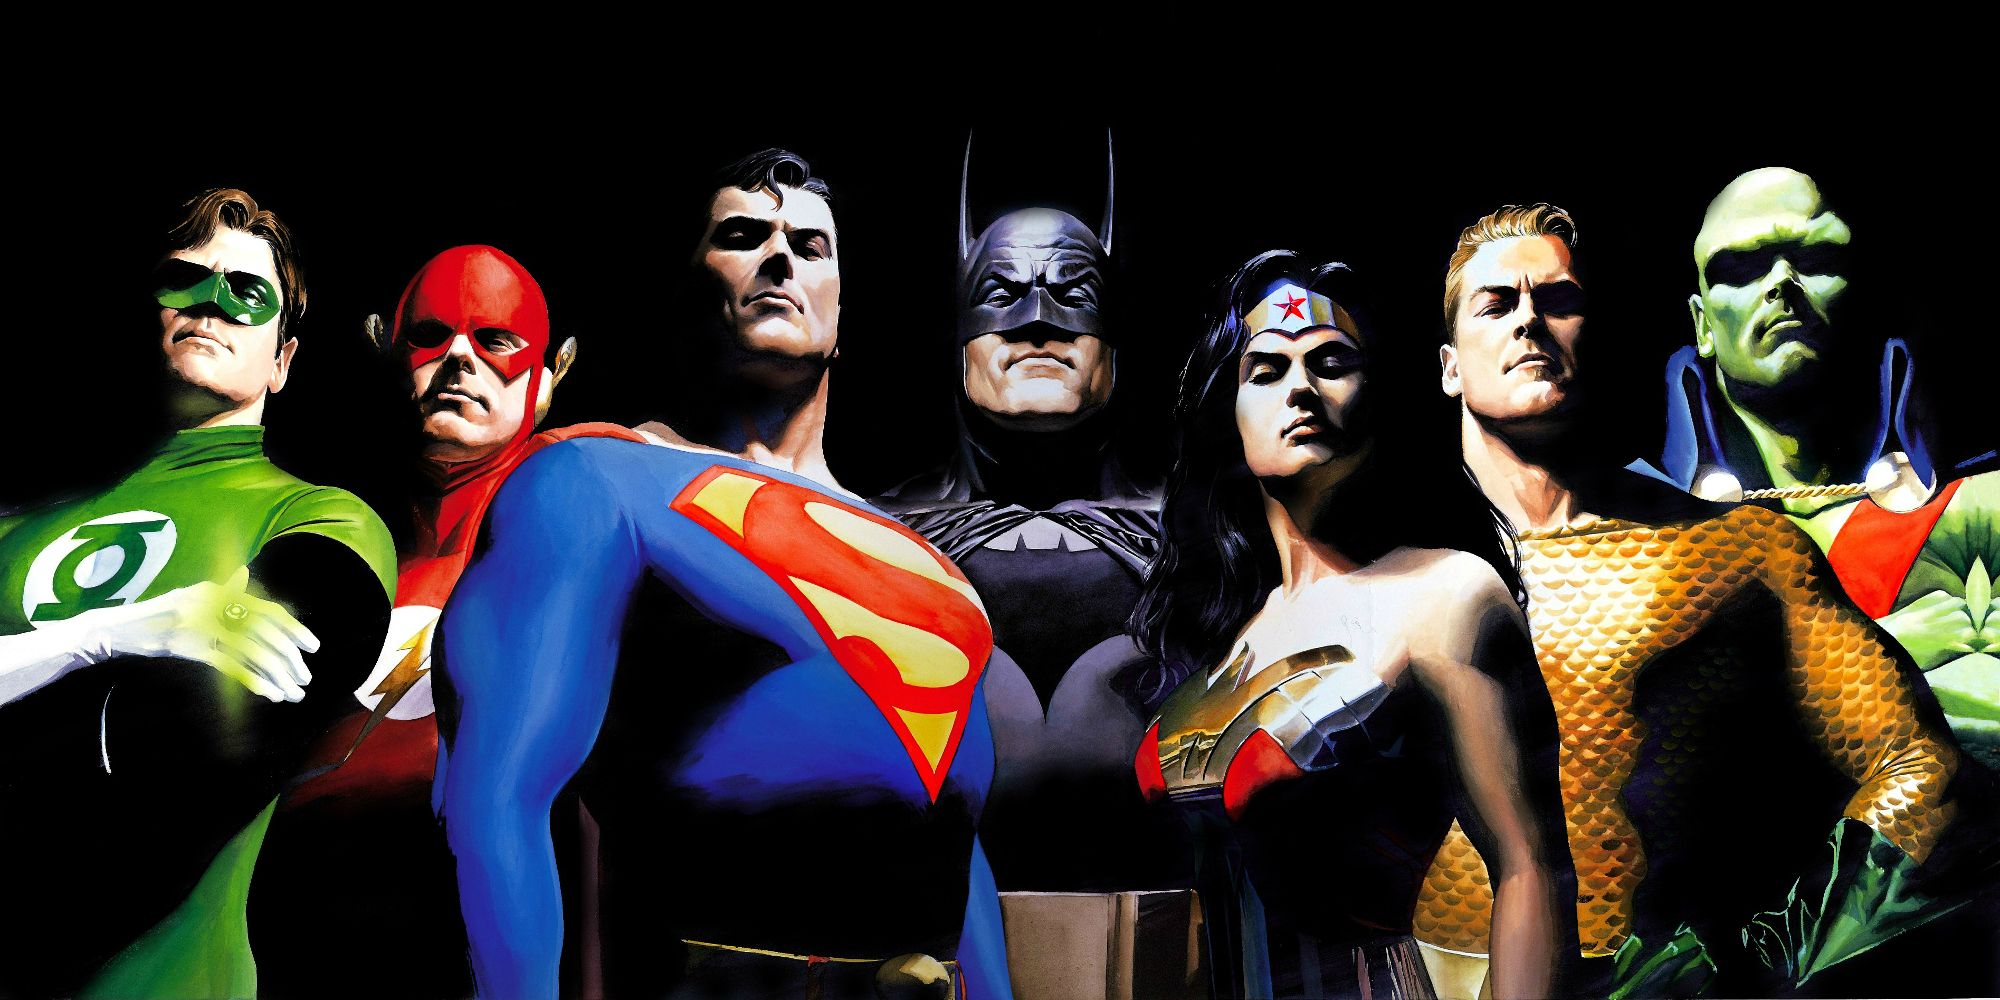 The original Justice League lineup as depicted by Alex Ross